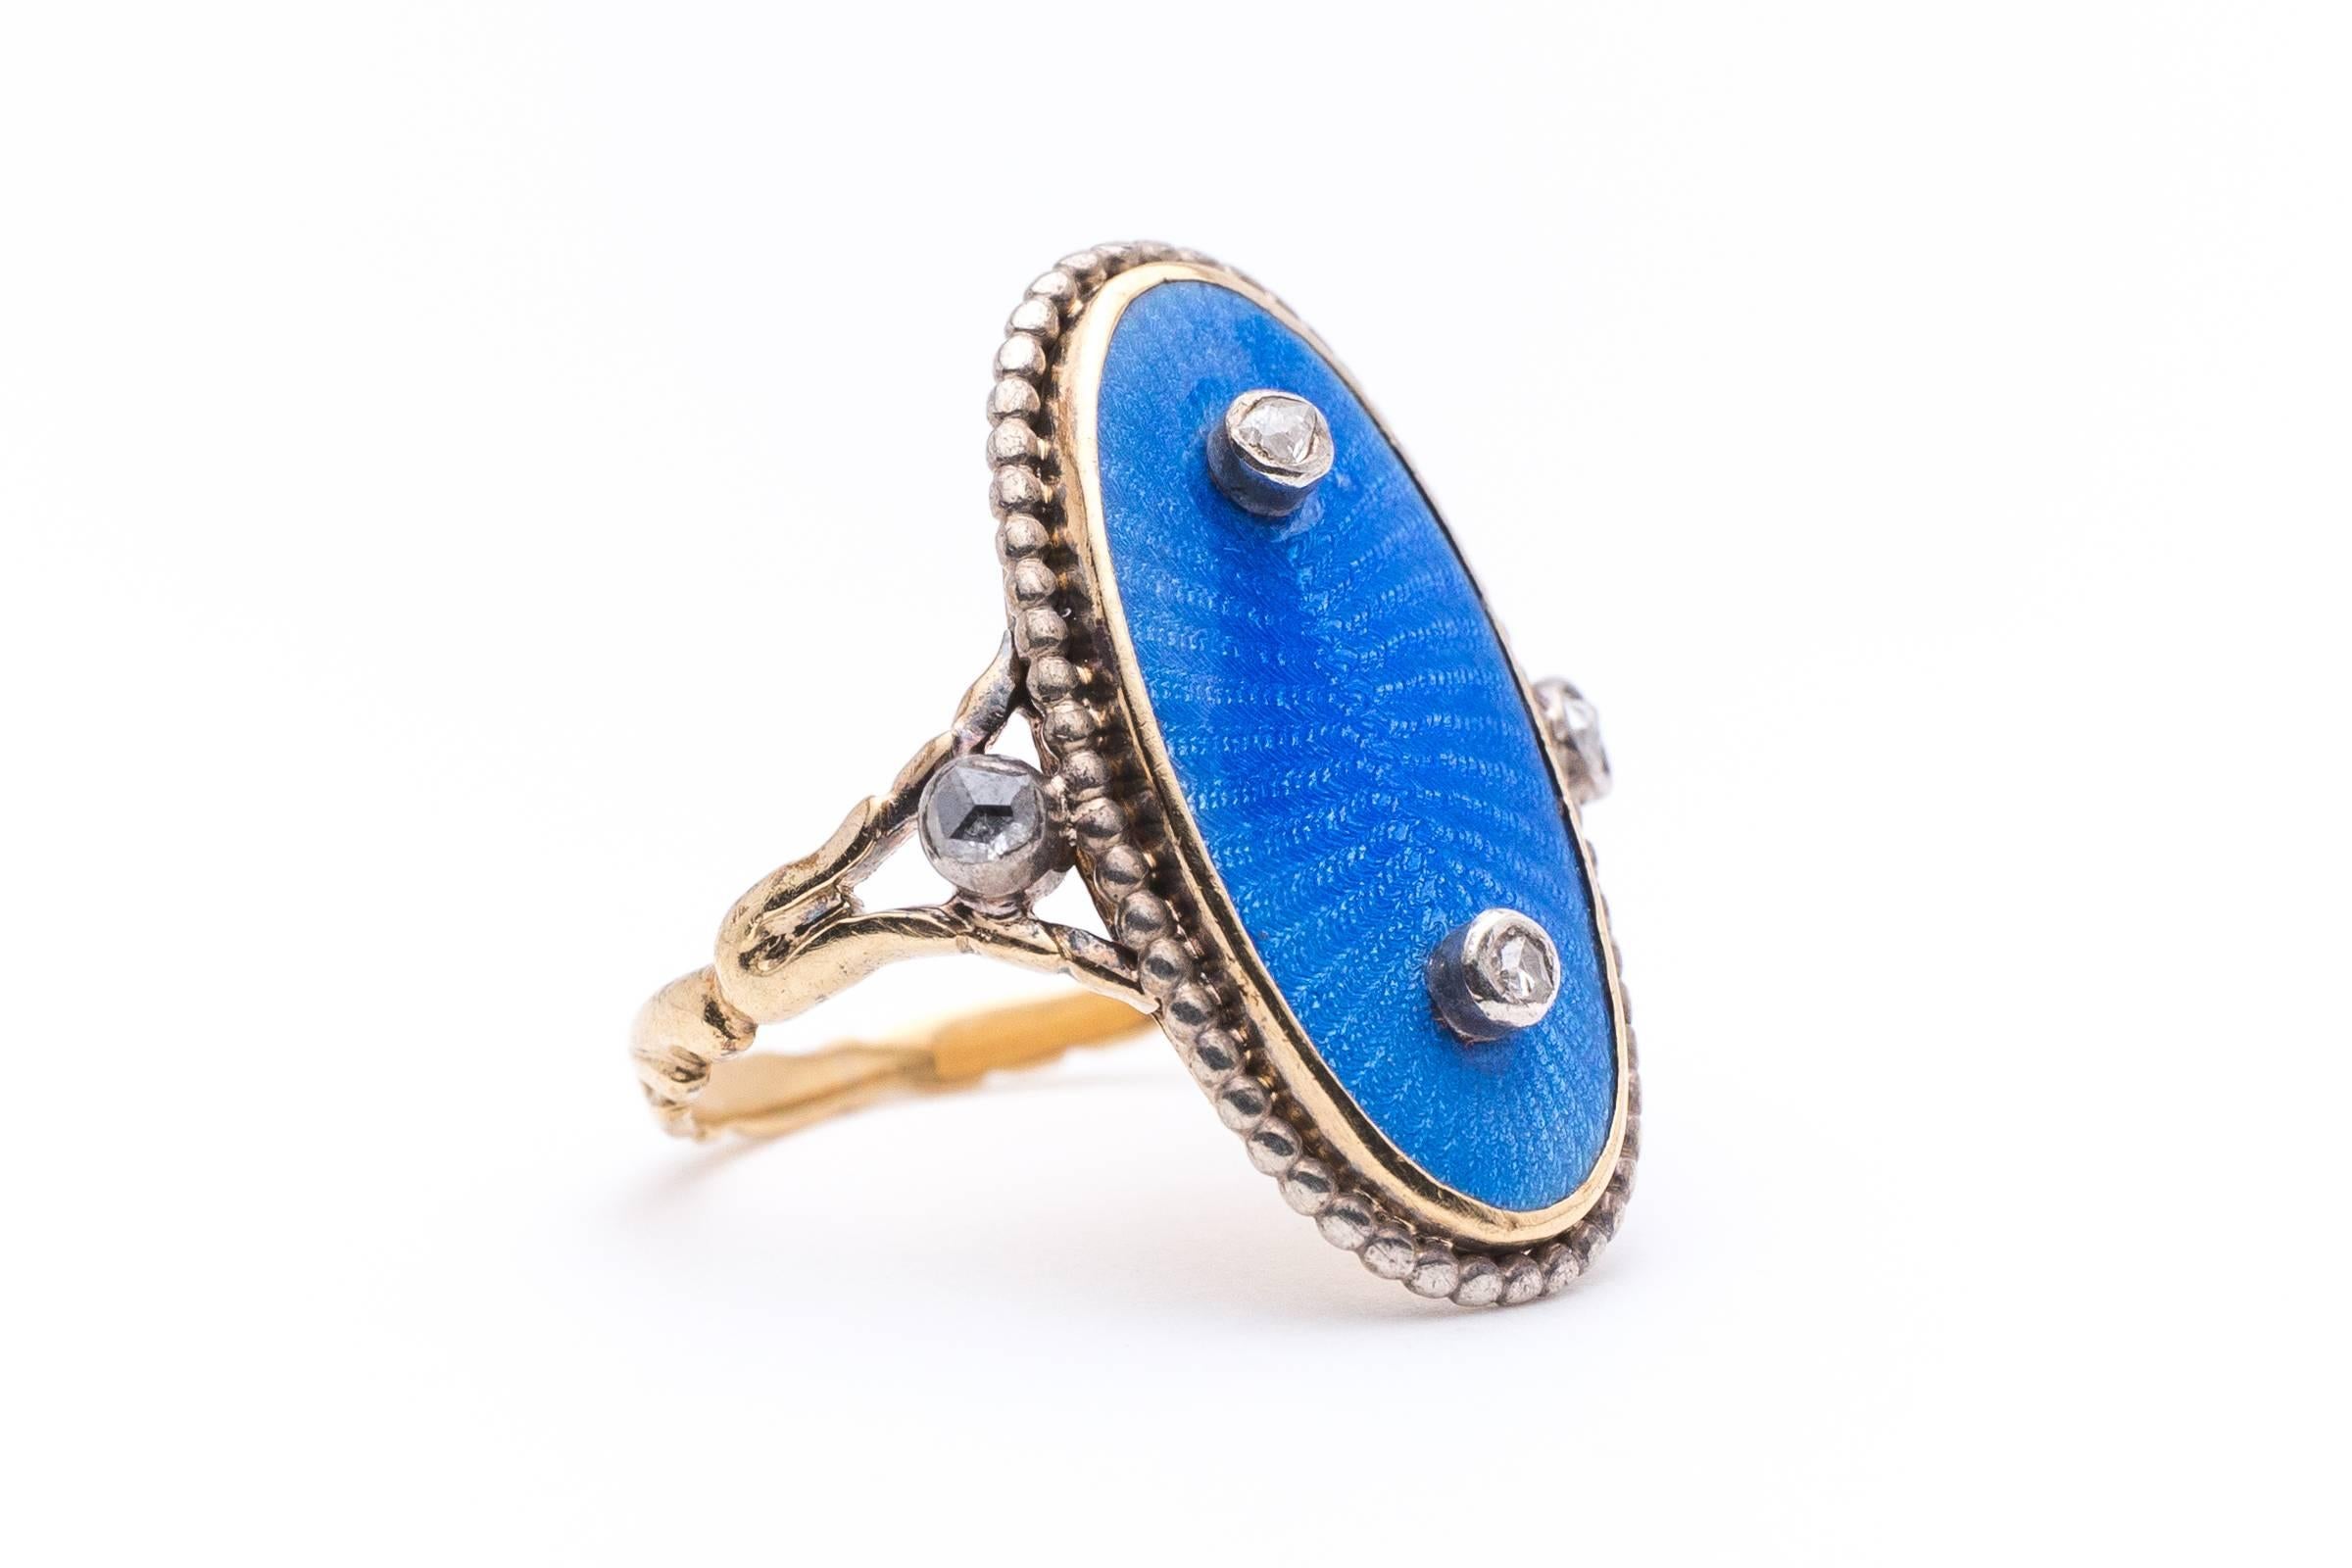 Beacon Hill Jewelers Presents:

A beautiful blue enameled plaque ring in tested yellow gold and silver. Featuring a center oval guilloche enameled plaque measuring an overall 20mm and accented by two silver bezel set rose cut